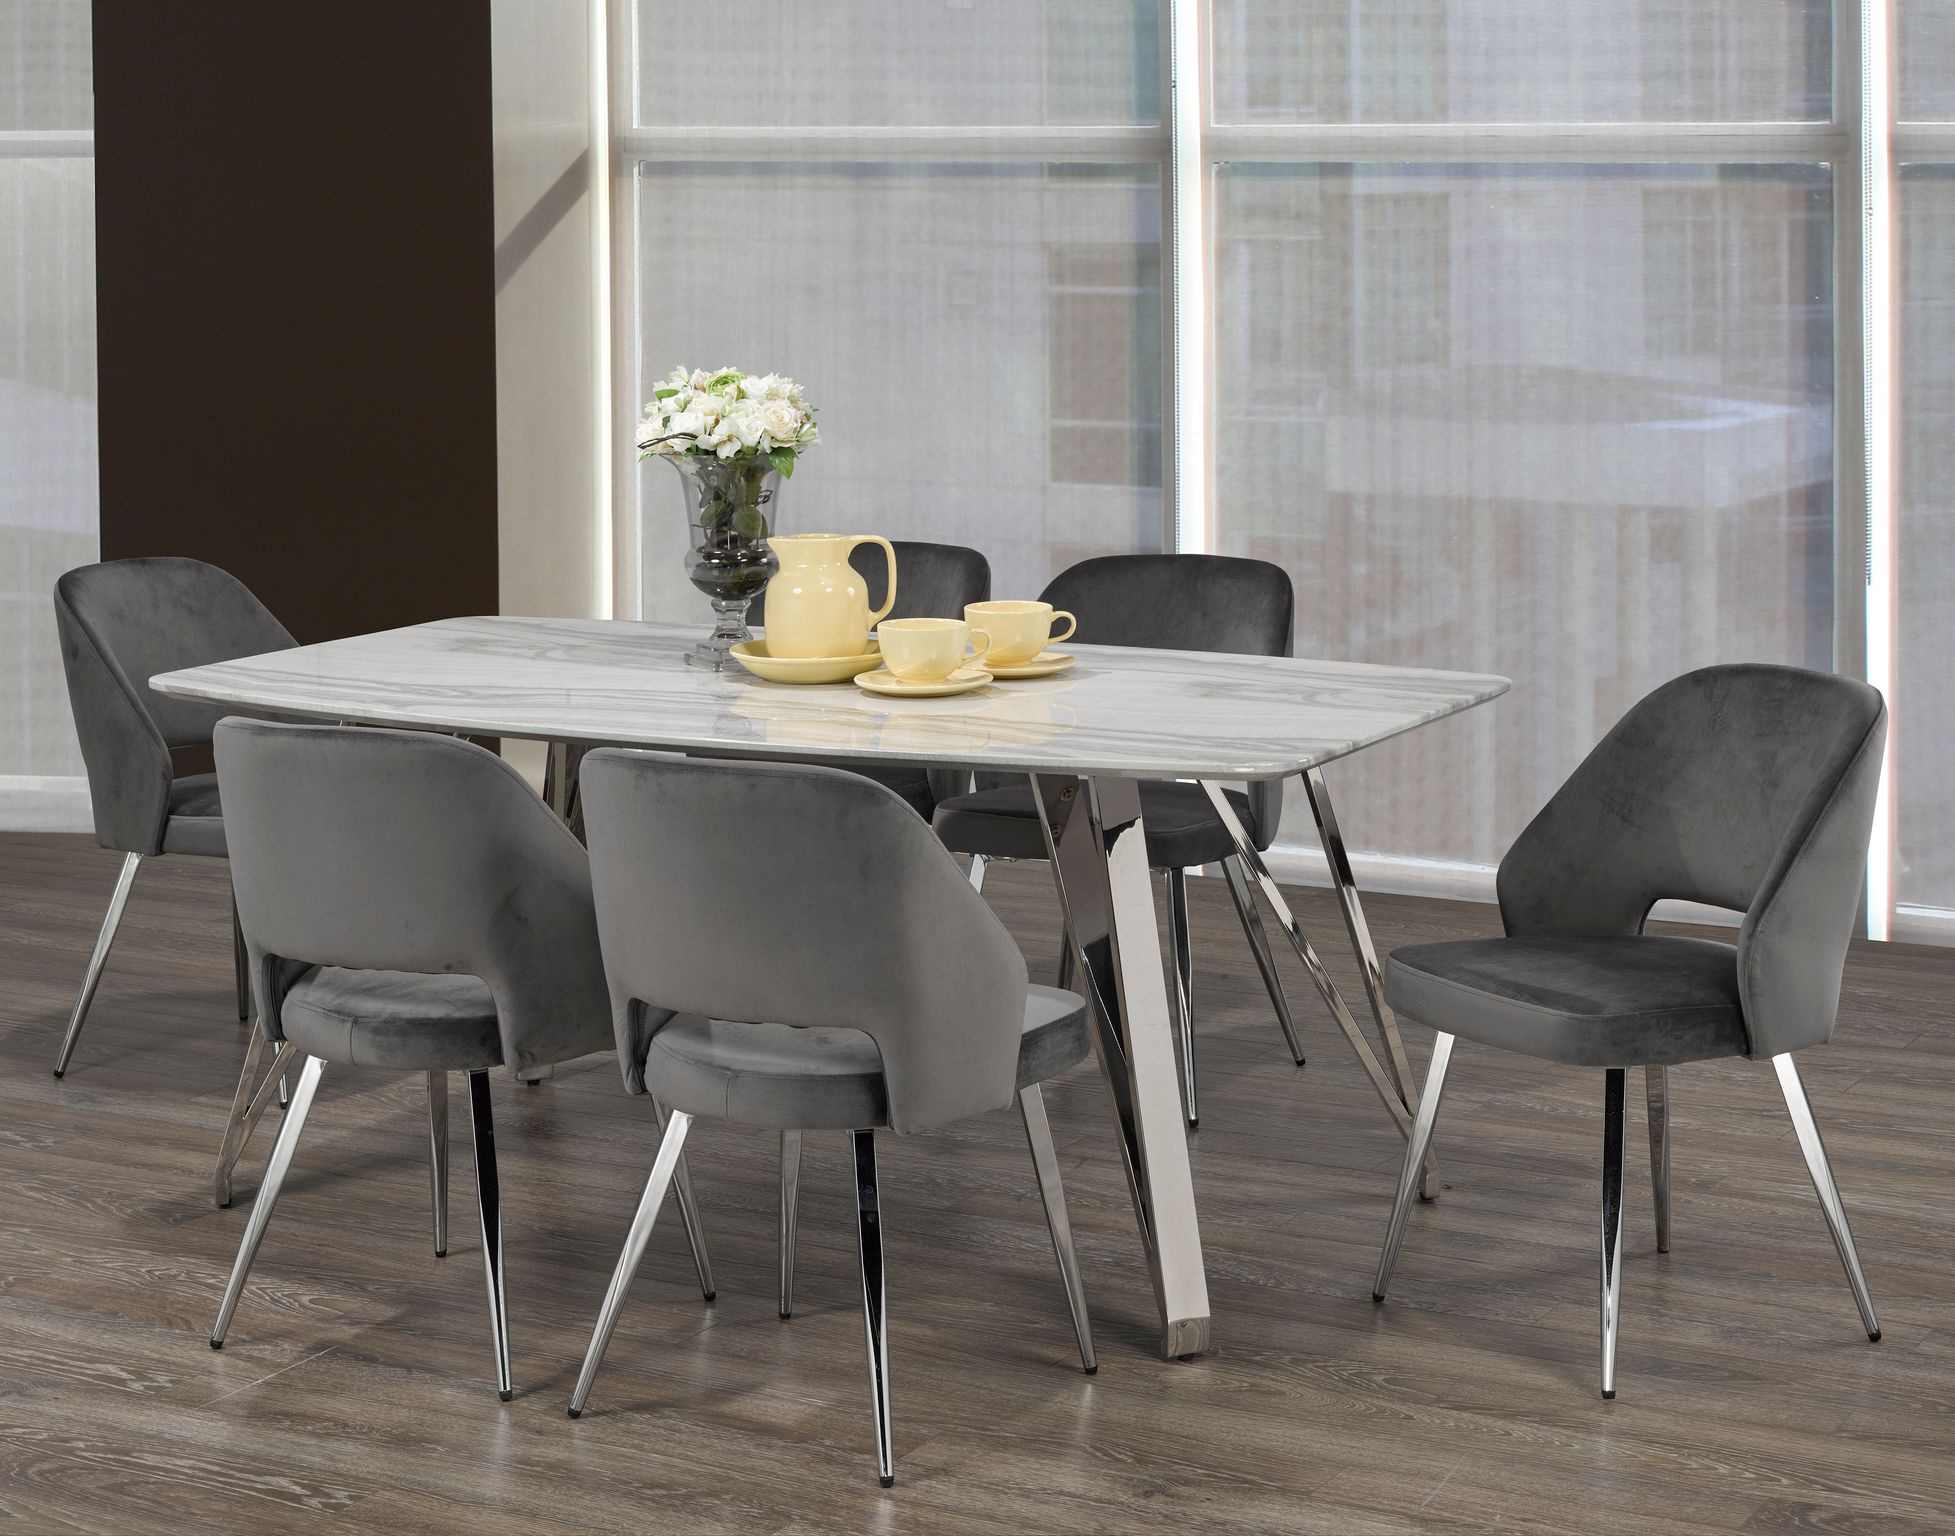 Ella Dining Table with 6 Grey Chairs 1194